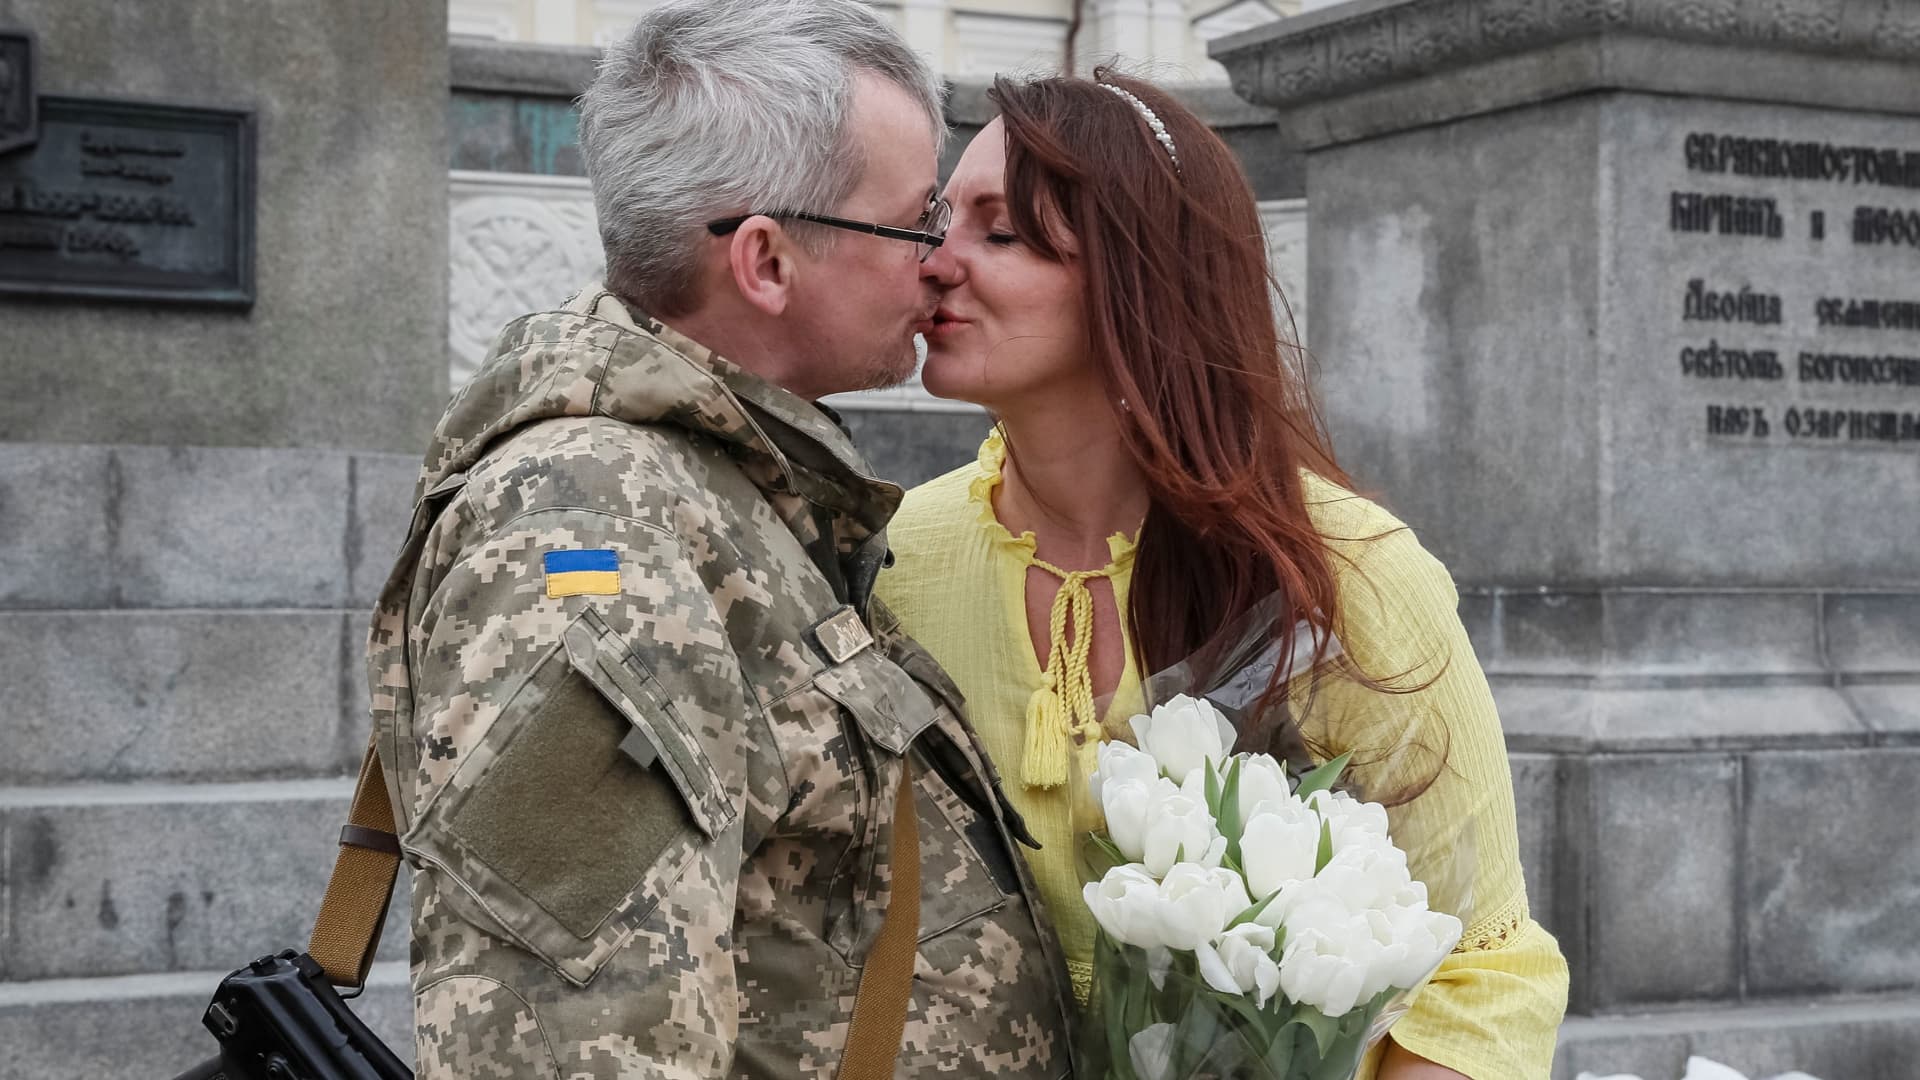 Newlywed Roman kisses his bride Ivanna in central Kyiv, Ukraine, March 26, 2022. 